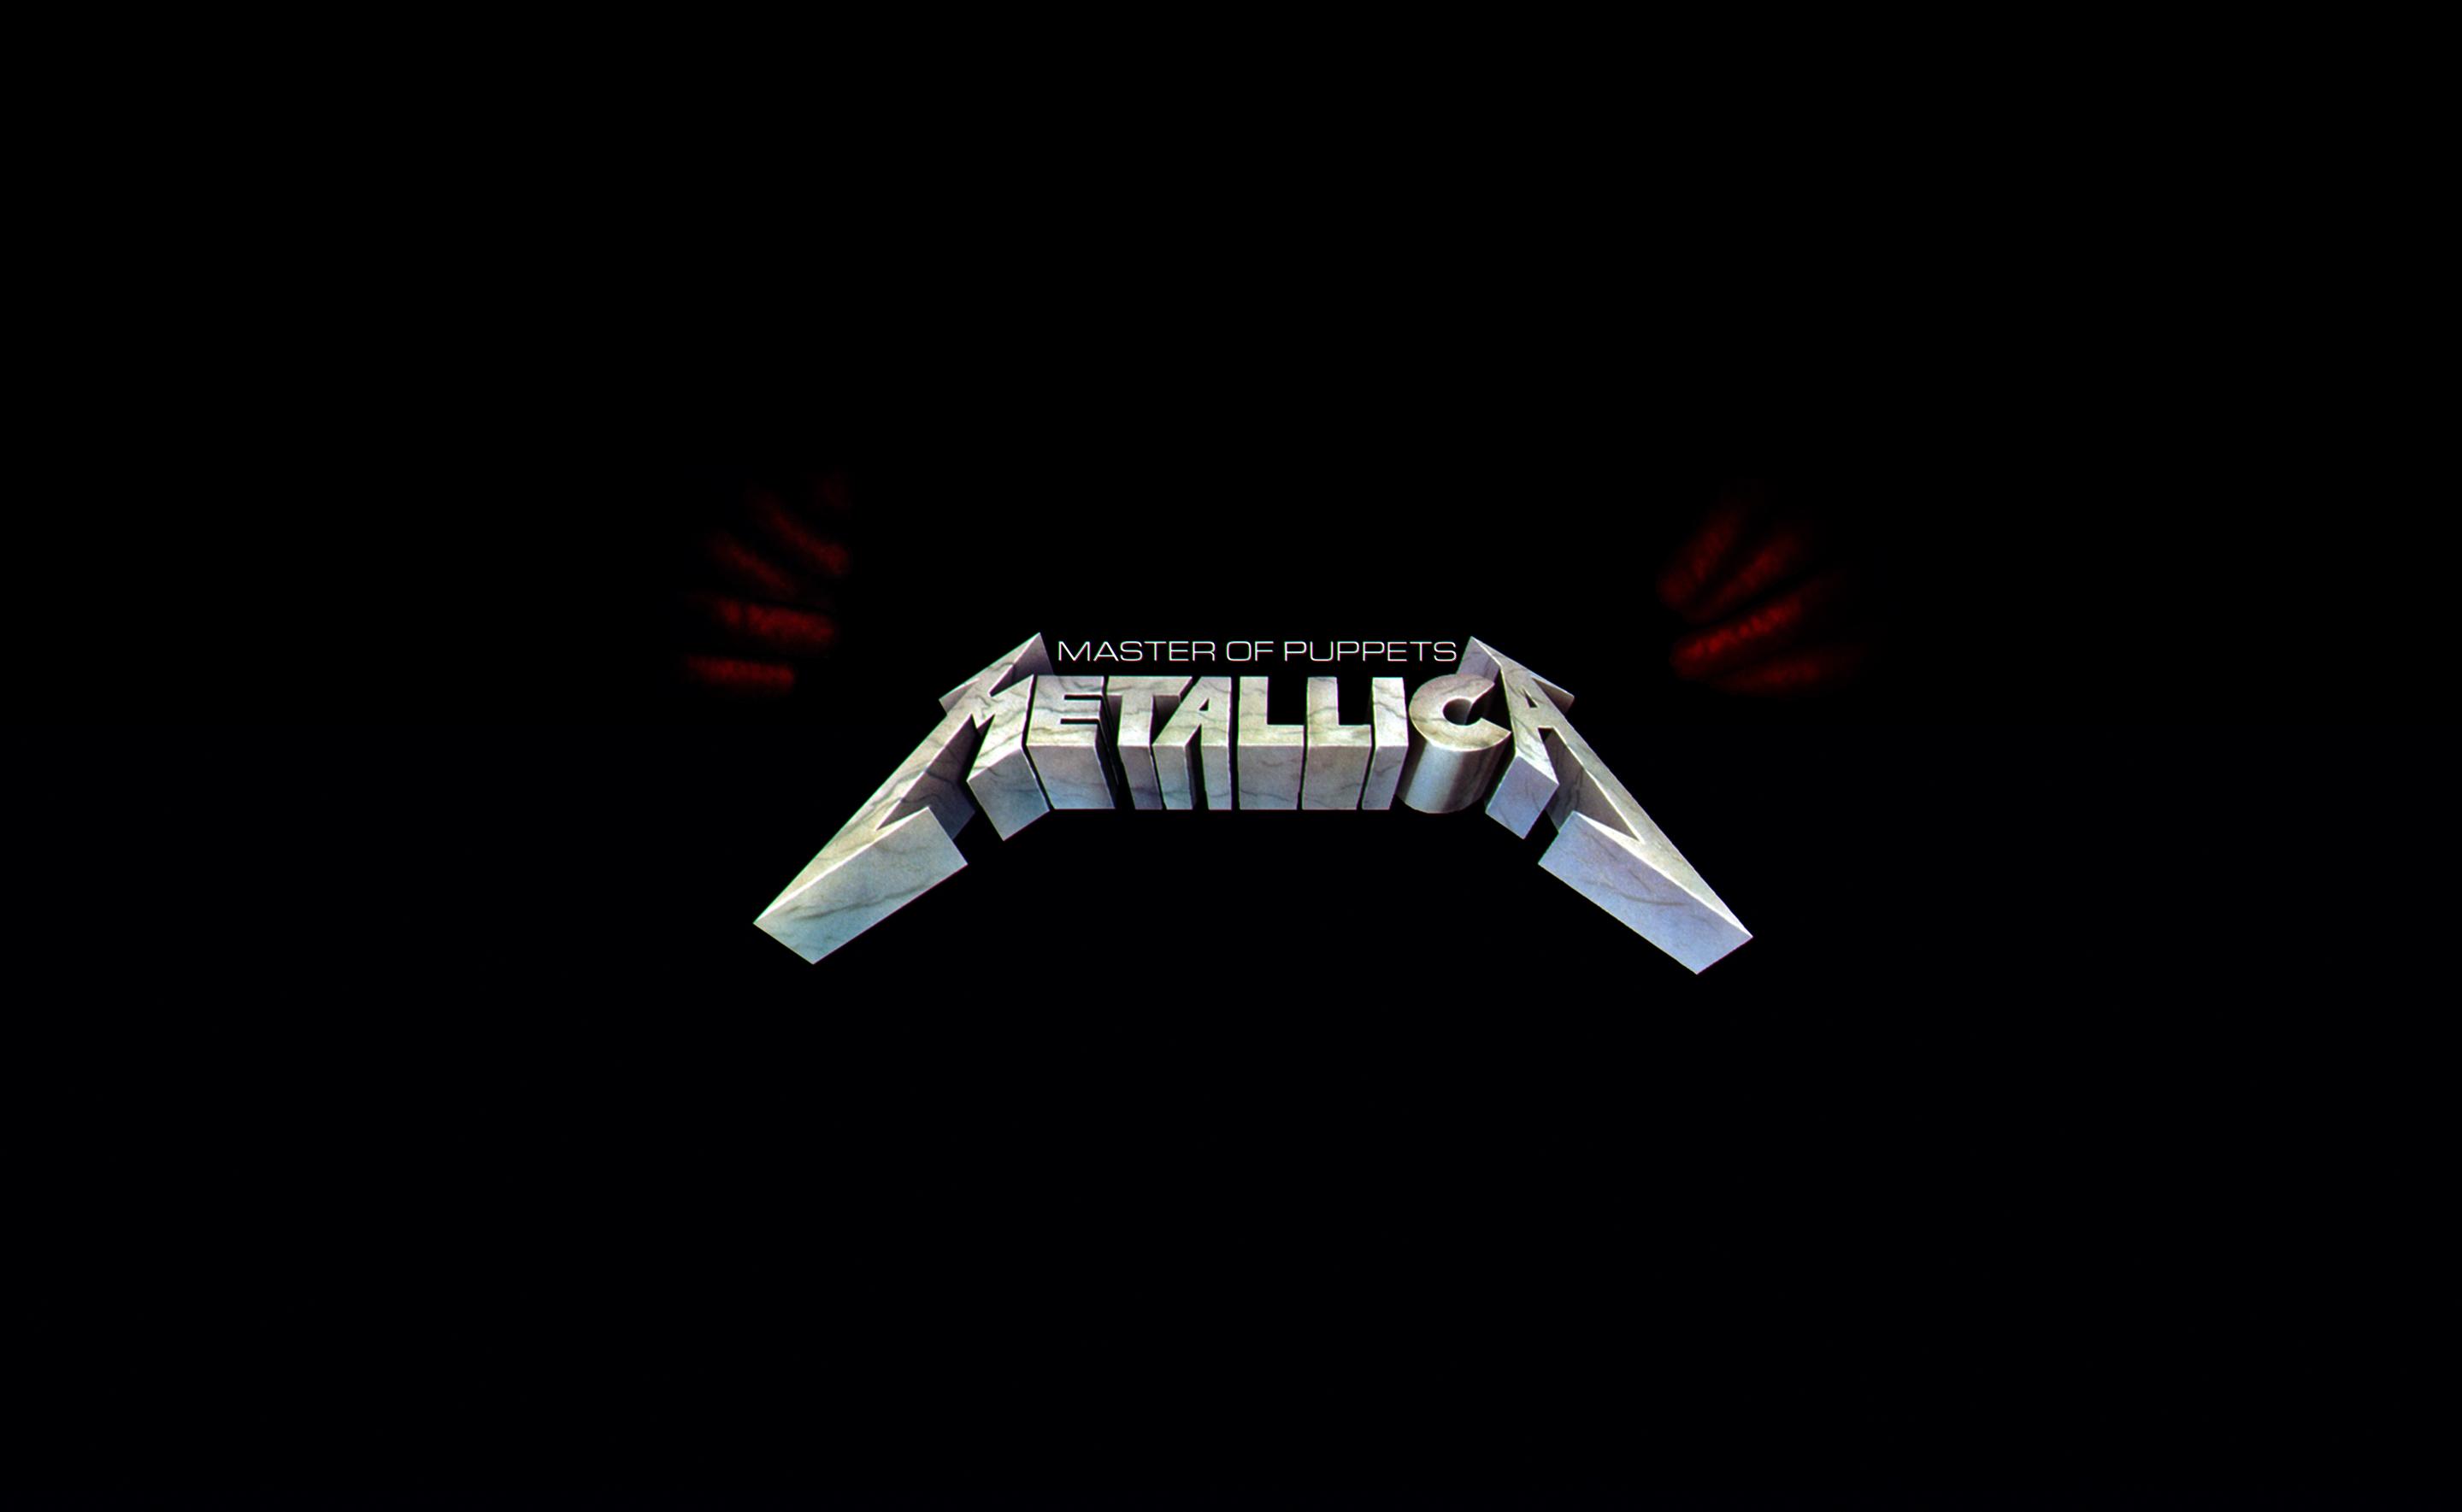 Metallica Master Of Puppets metallica master of puppets  for your   Mobile  Tablet Explore Metallica Master of Puppets  Metallica Master of  Puppets HD wallpaper  Pxfuel